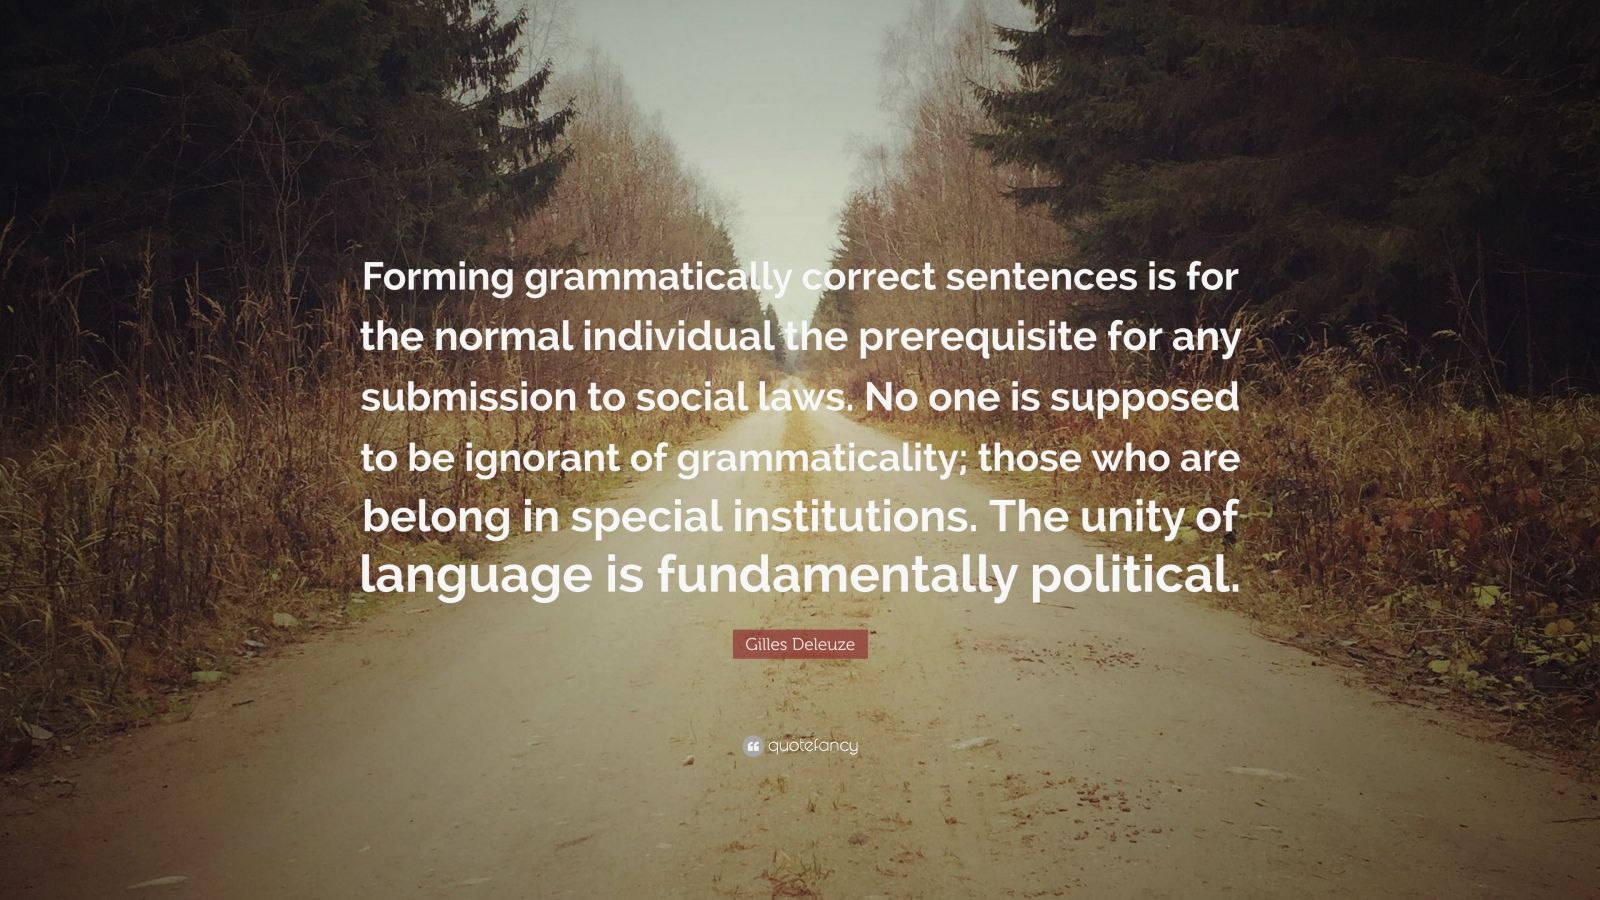 gilles-deleuze-quote-forming-grammatically-correct-sentences-is-for-the-normal-individual-the